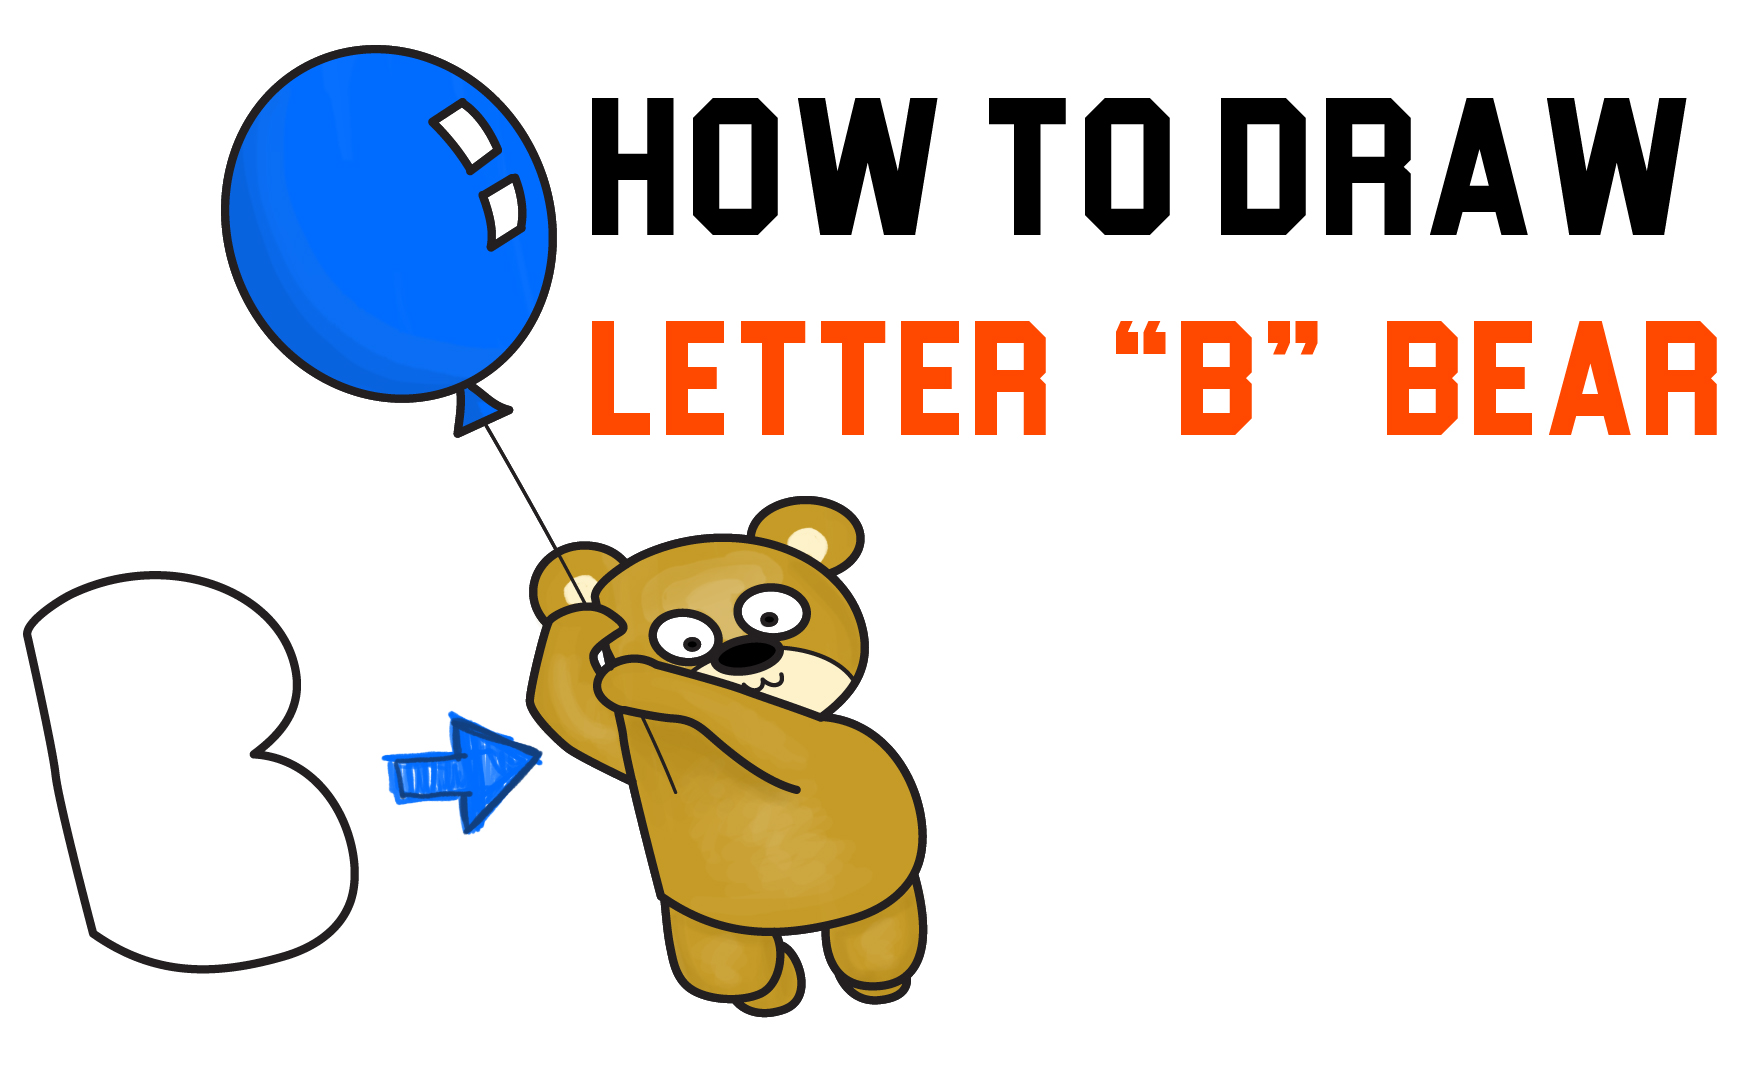 How to Draw a Cartoon Bear Holding a Balloon Floating Up Easy from Letter B  Easy Step by Step Drawing Tutorial for Kids - How to Draw Step by Step  Drawing Tutorials